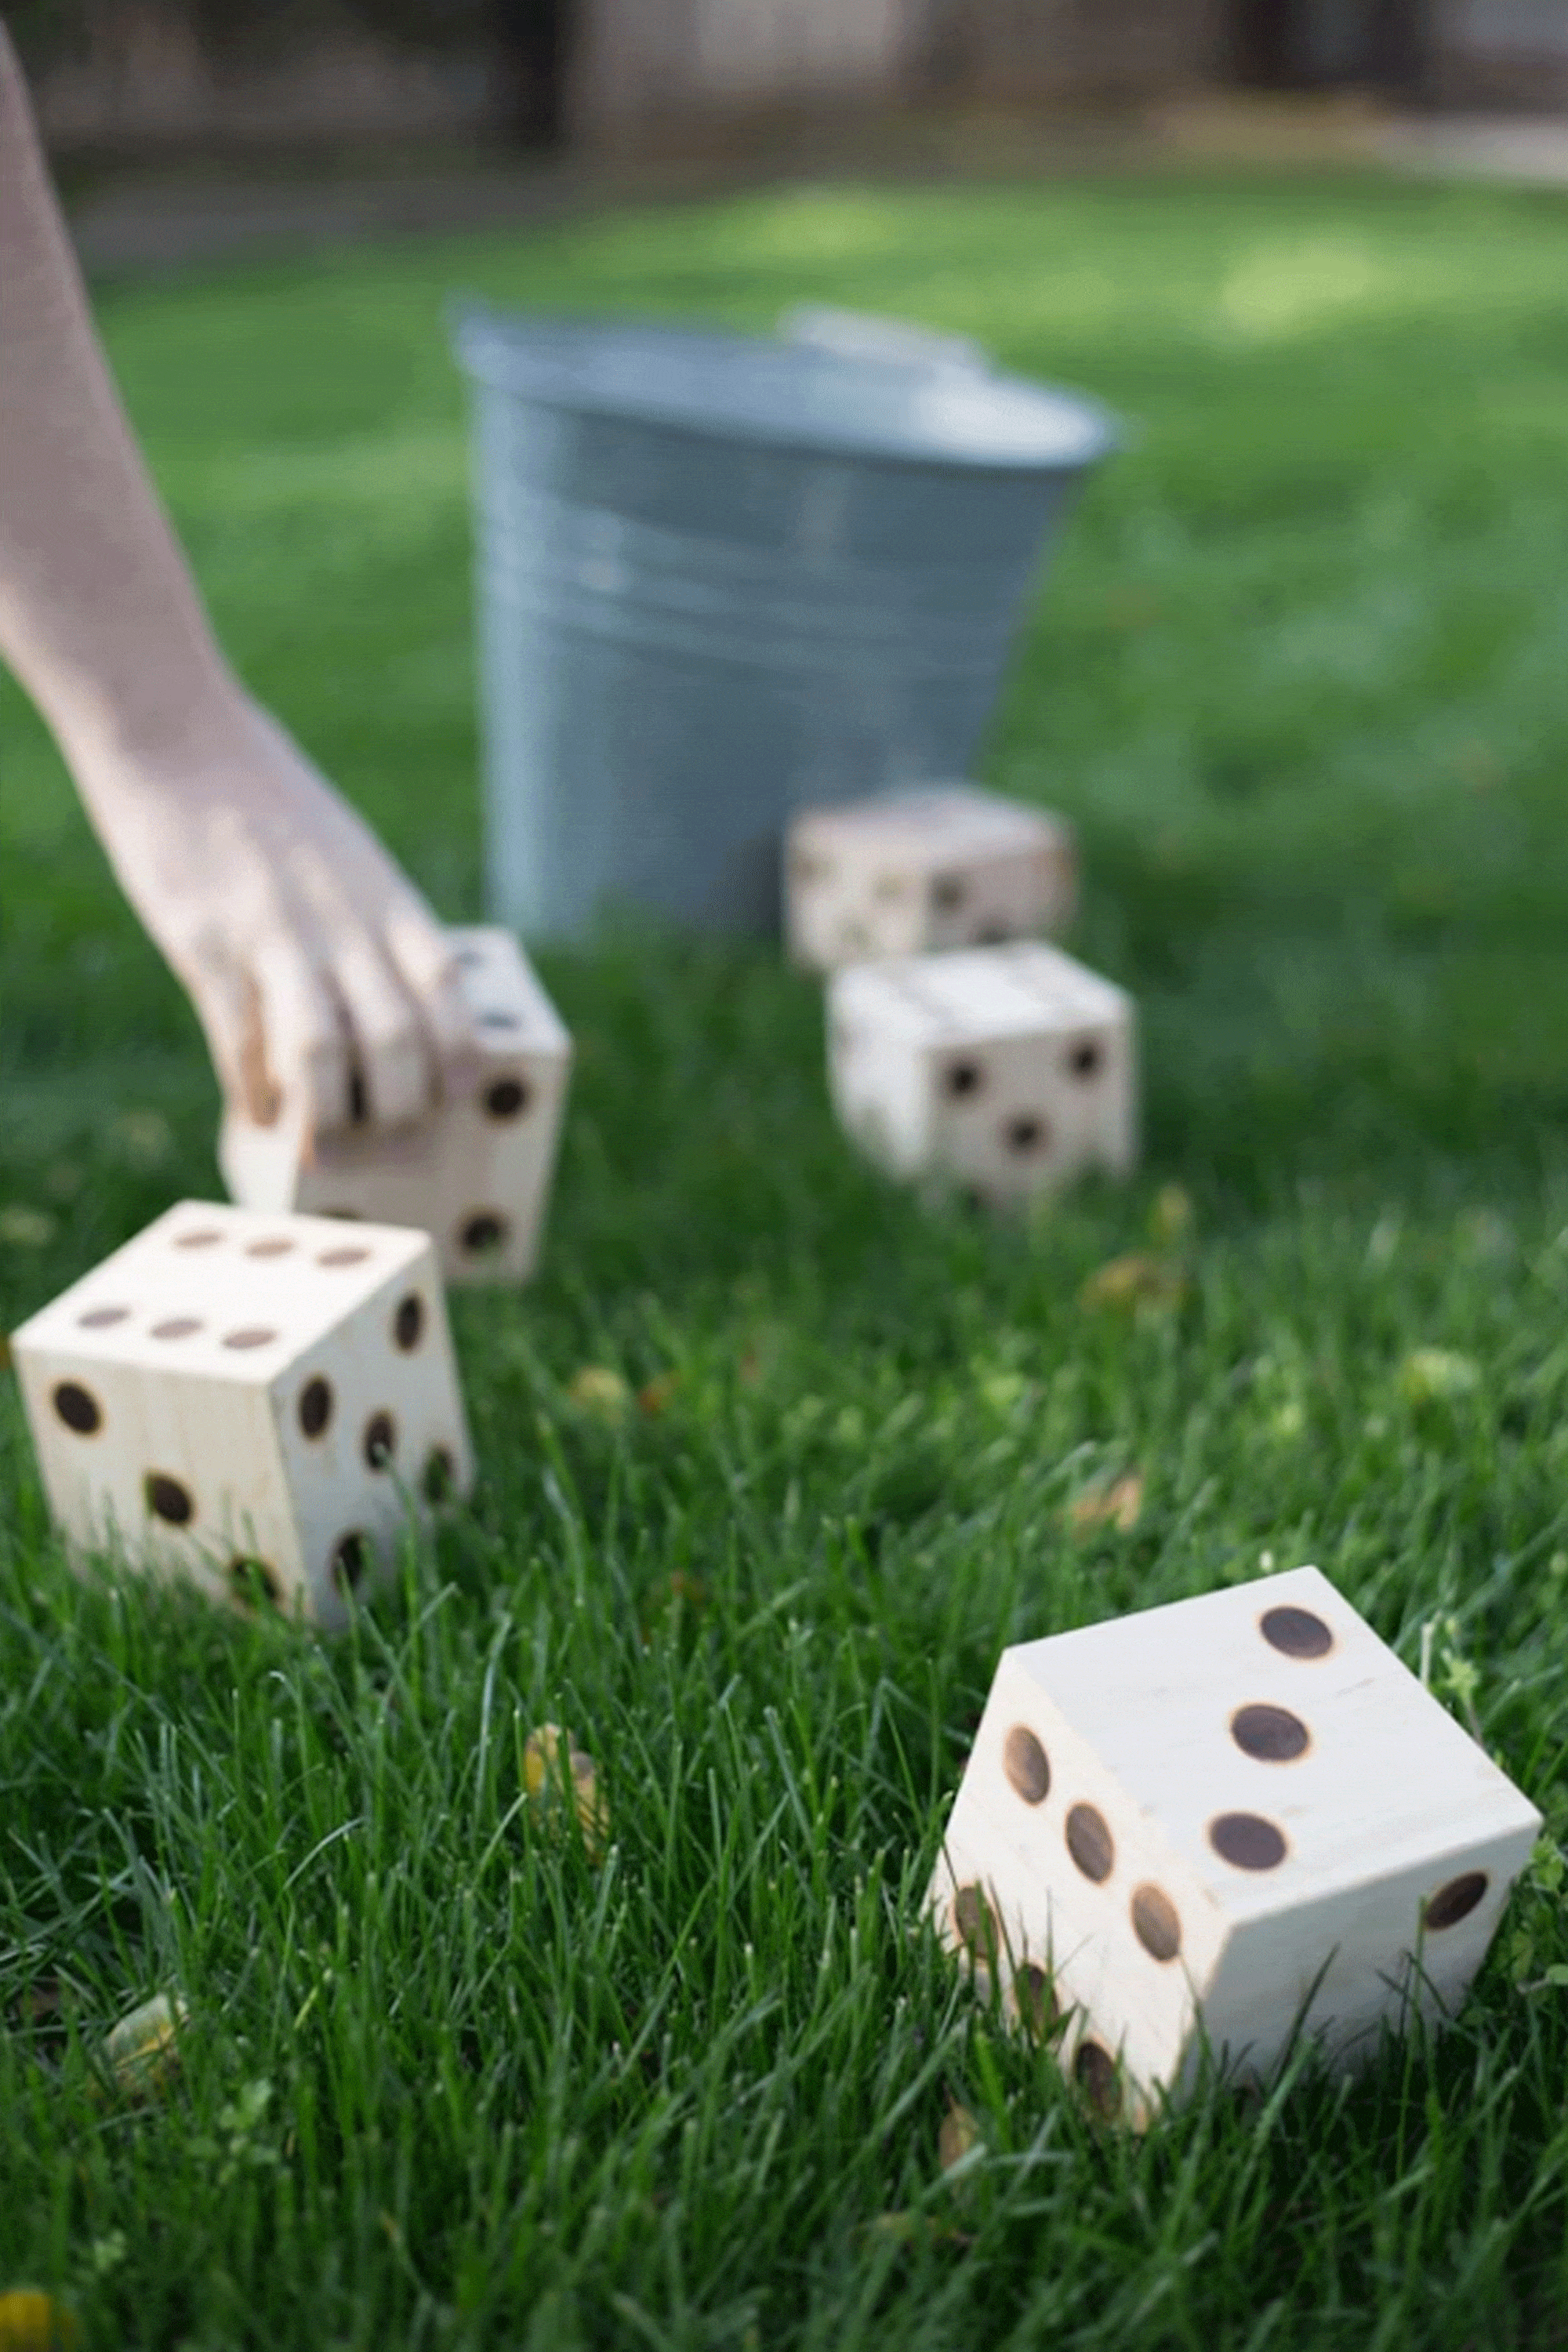 20 Fun DIY Outdoor Games For Kids Backyard Party Games For Groups